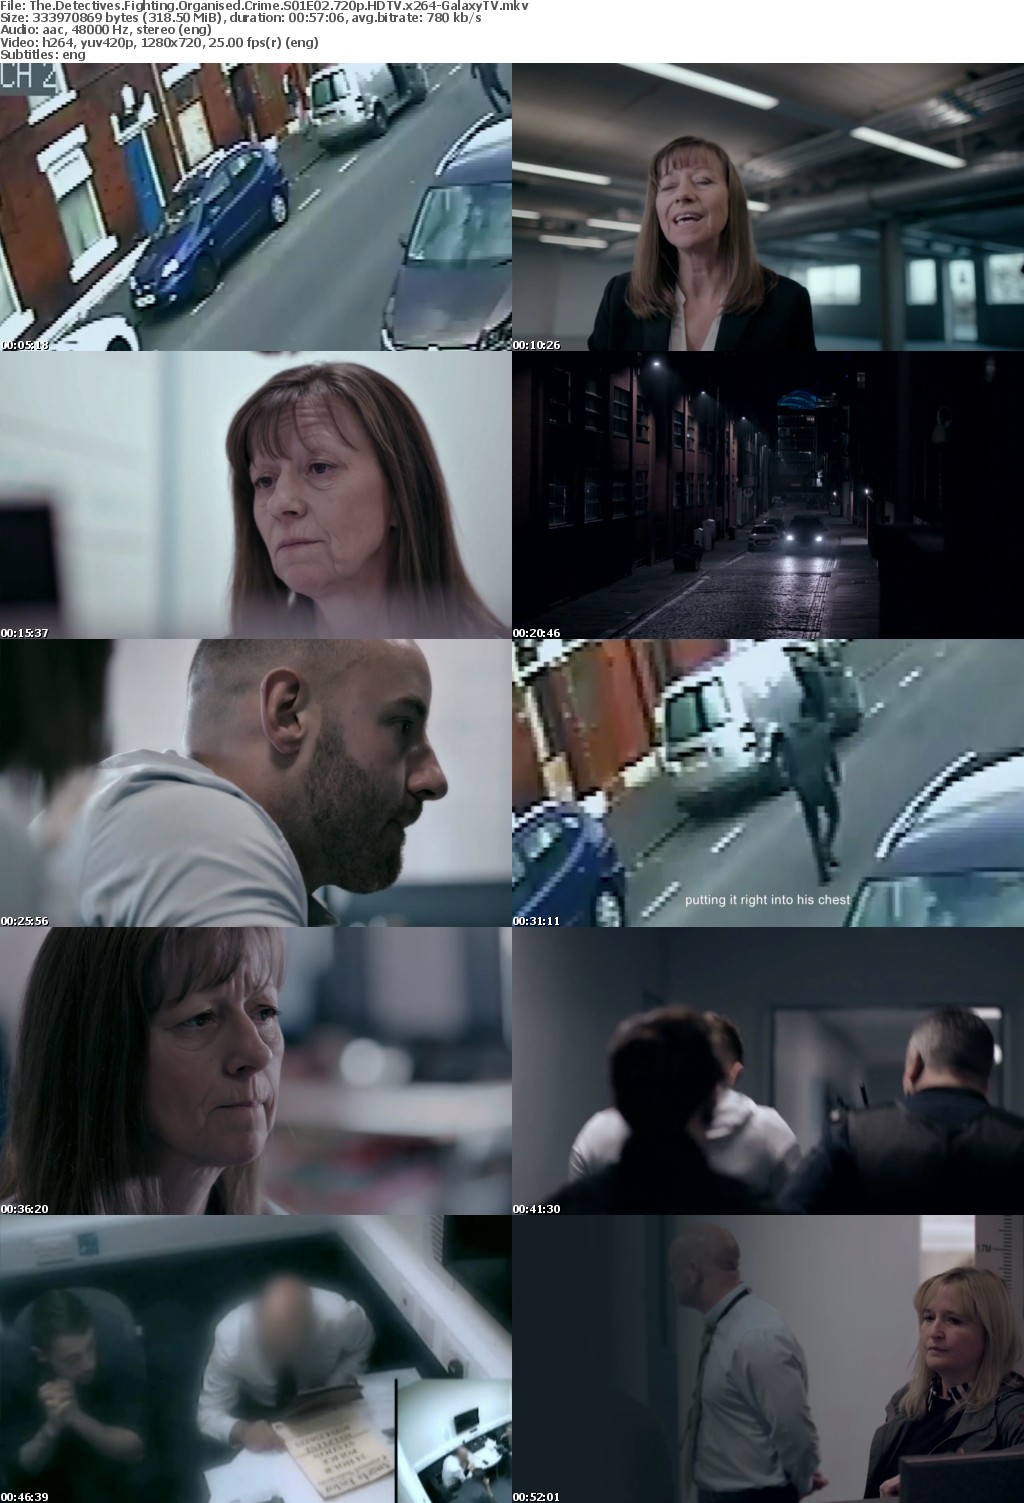 The Detectives Fighting Organised Crime S01 COMPLETE 720p HDTV x264-GalaxyTV